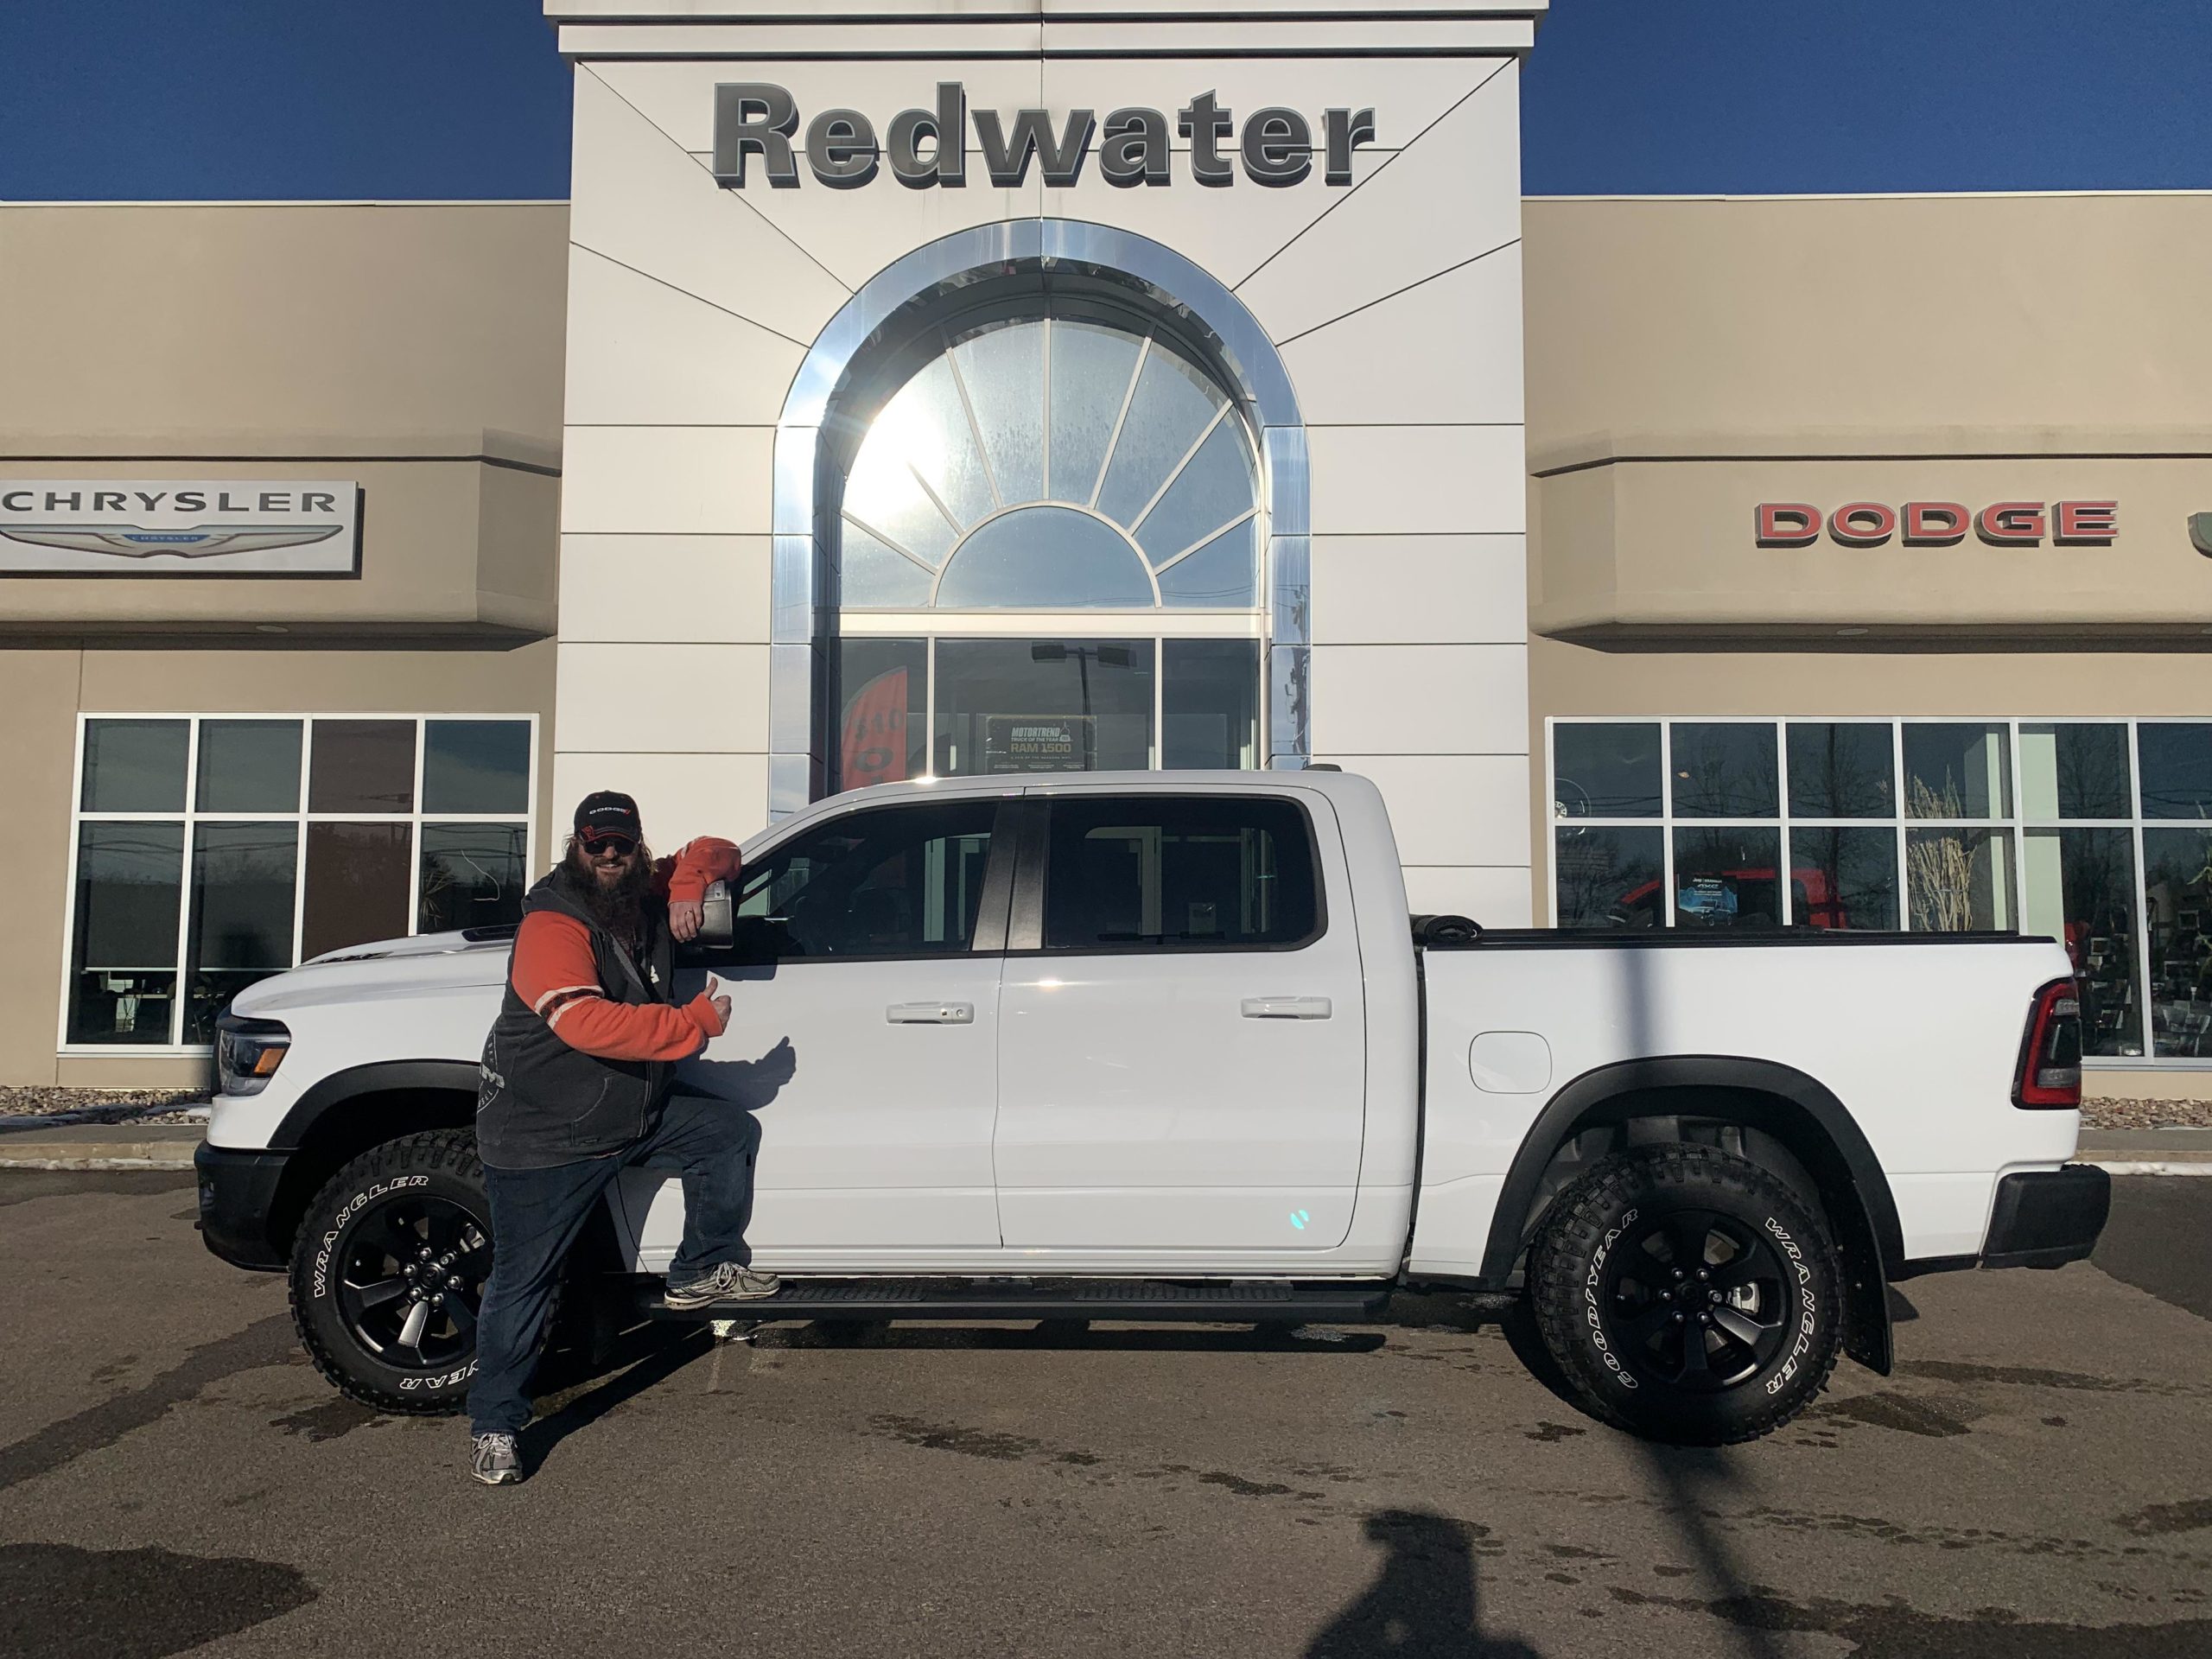 NR16874 2022 Ram 1500 Rebel Night Crew Cab 4x4 - Sales Manager Demo Special Redwater Dodge